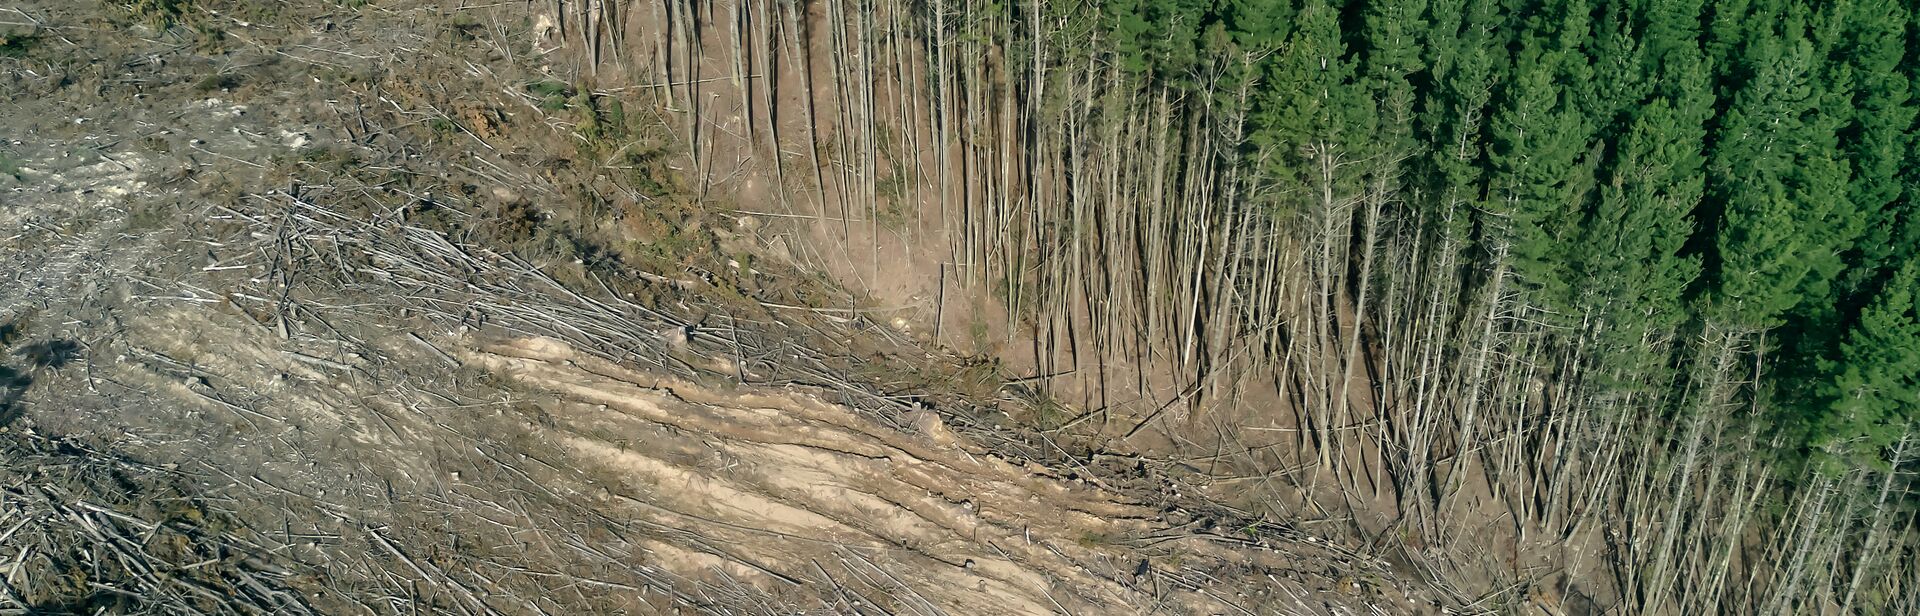 an image demonstrating deforestation, with green forest on the top half of the image, then there is a clear line where trees have been cut down and the ground is brown with fallen logs